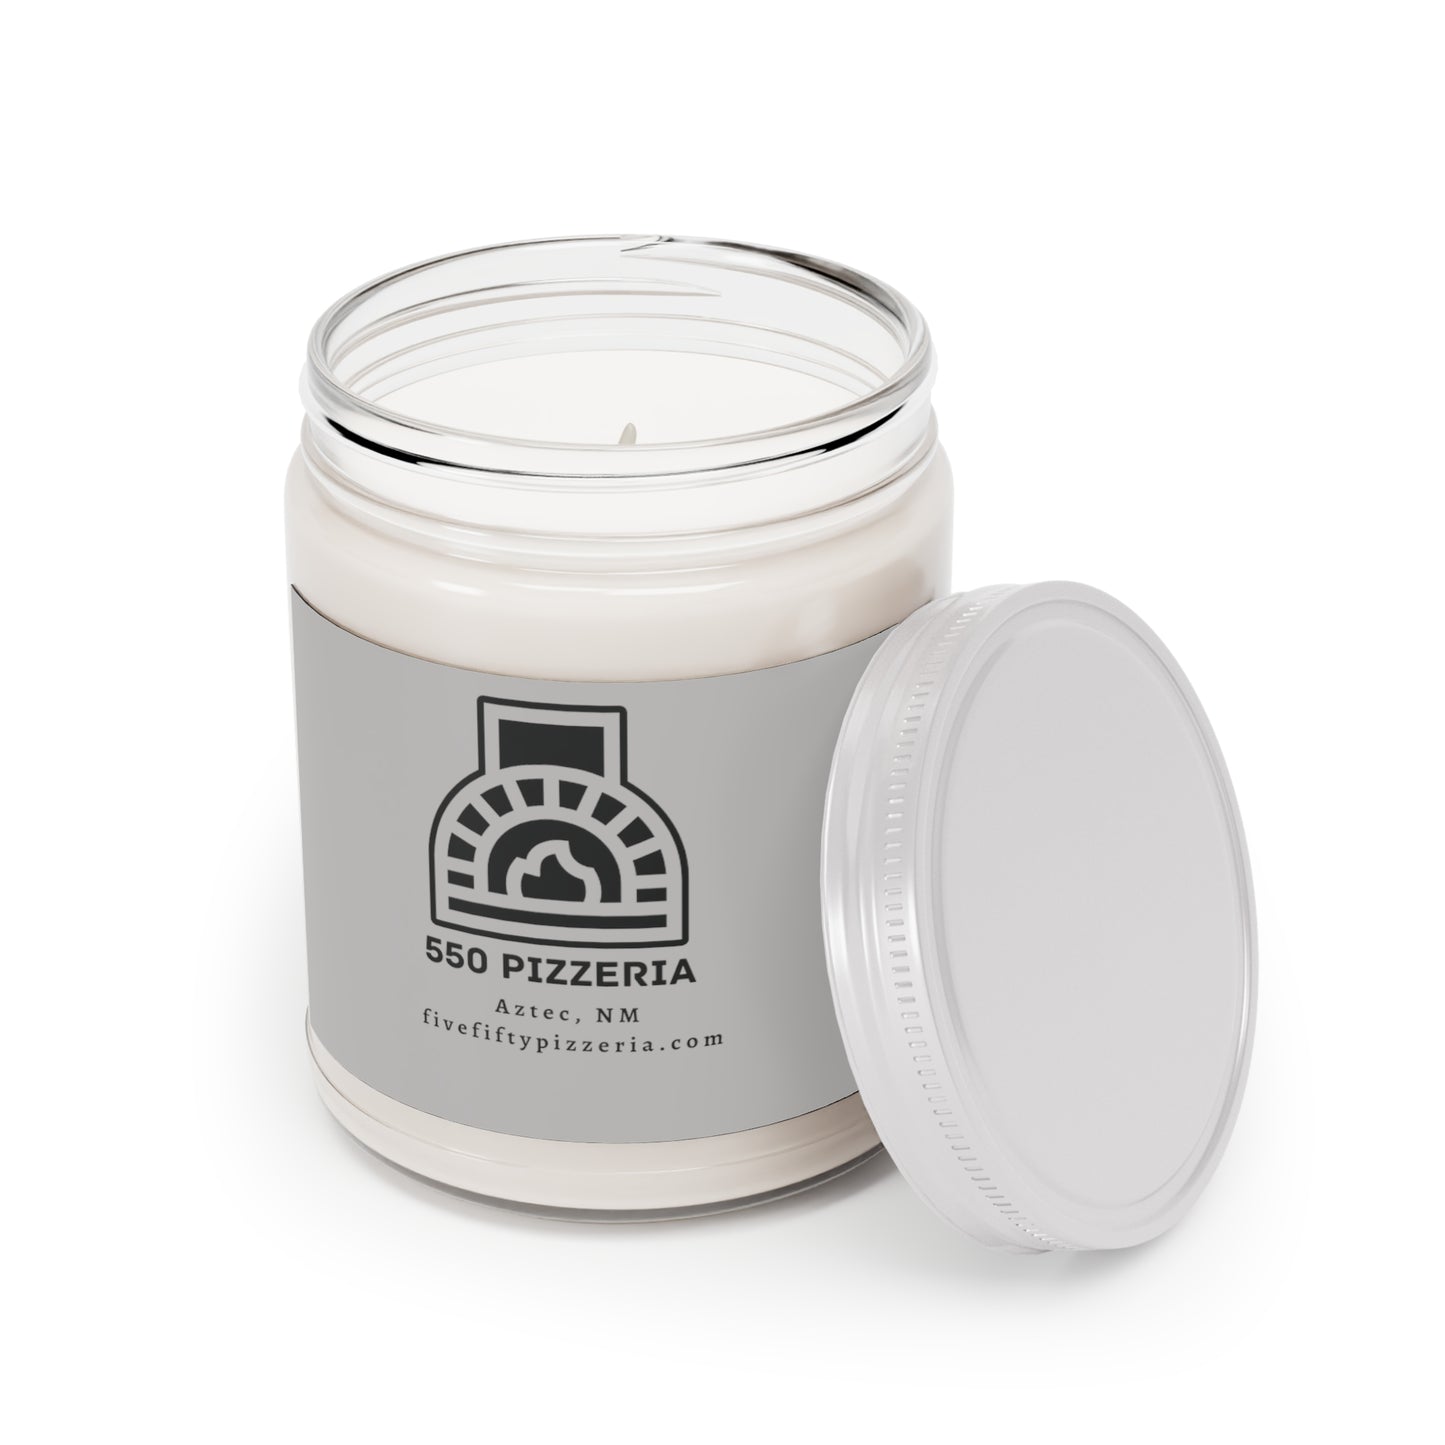 550 Pizzeria Scented Candles, 9oz